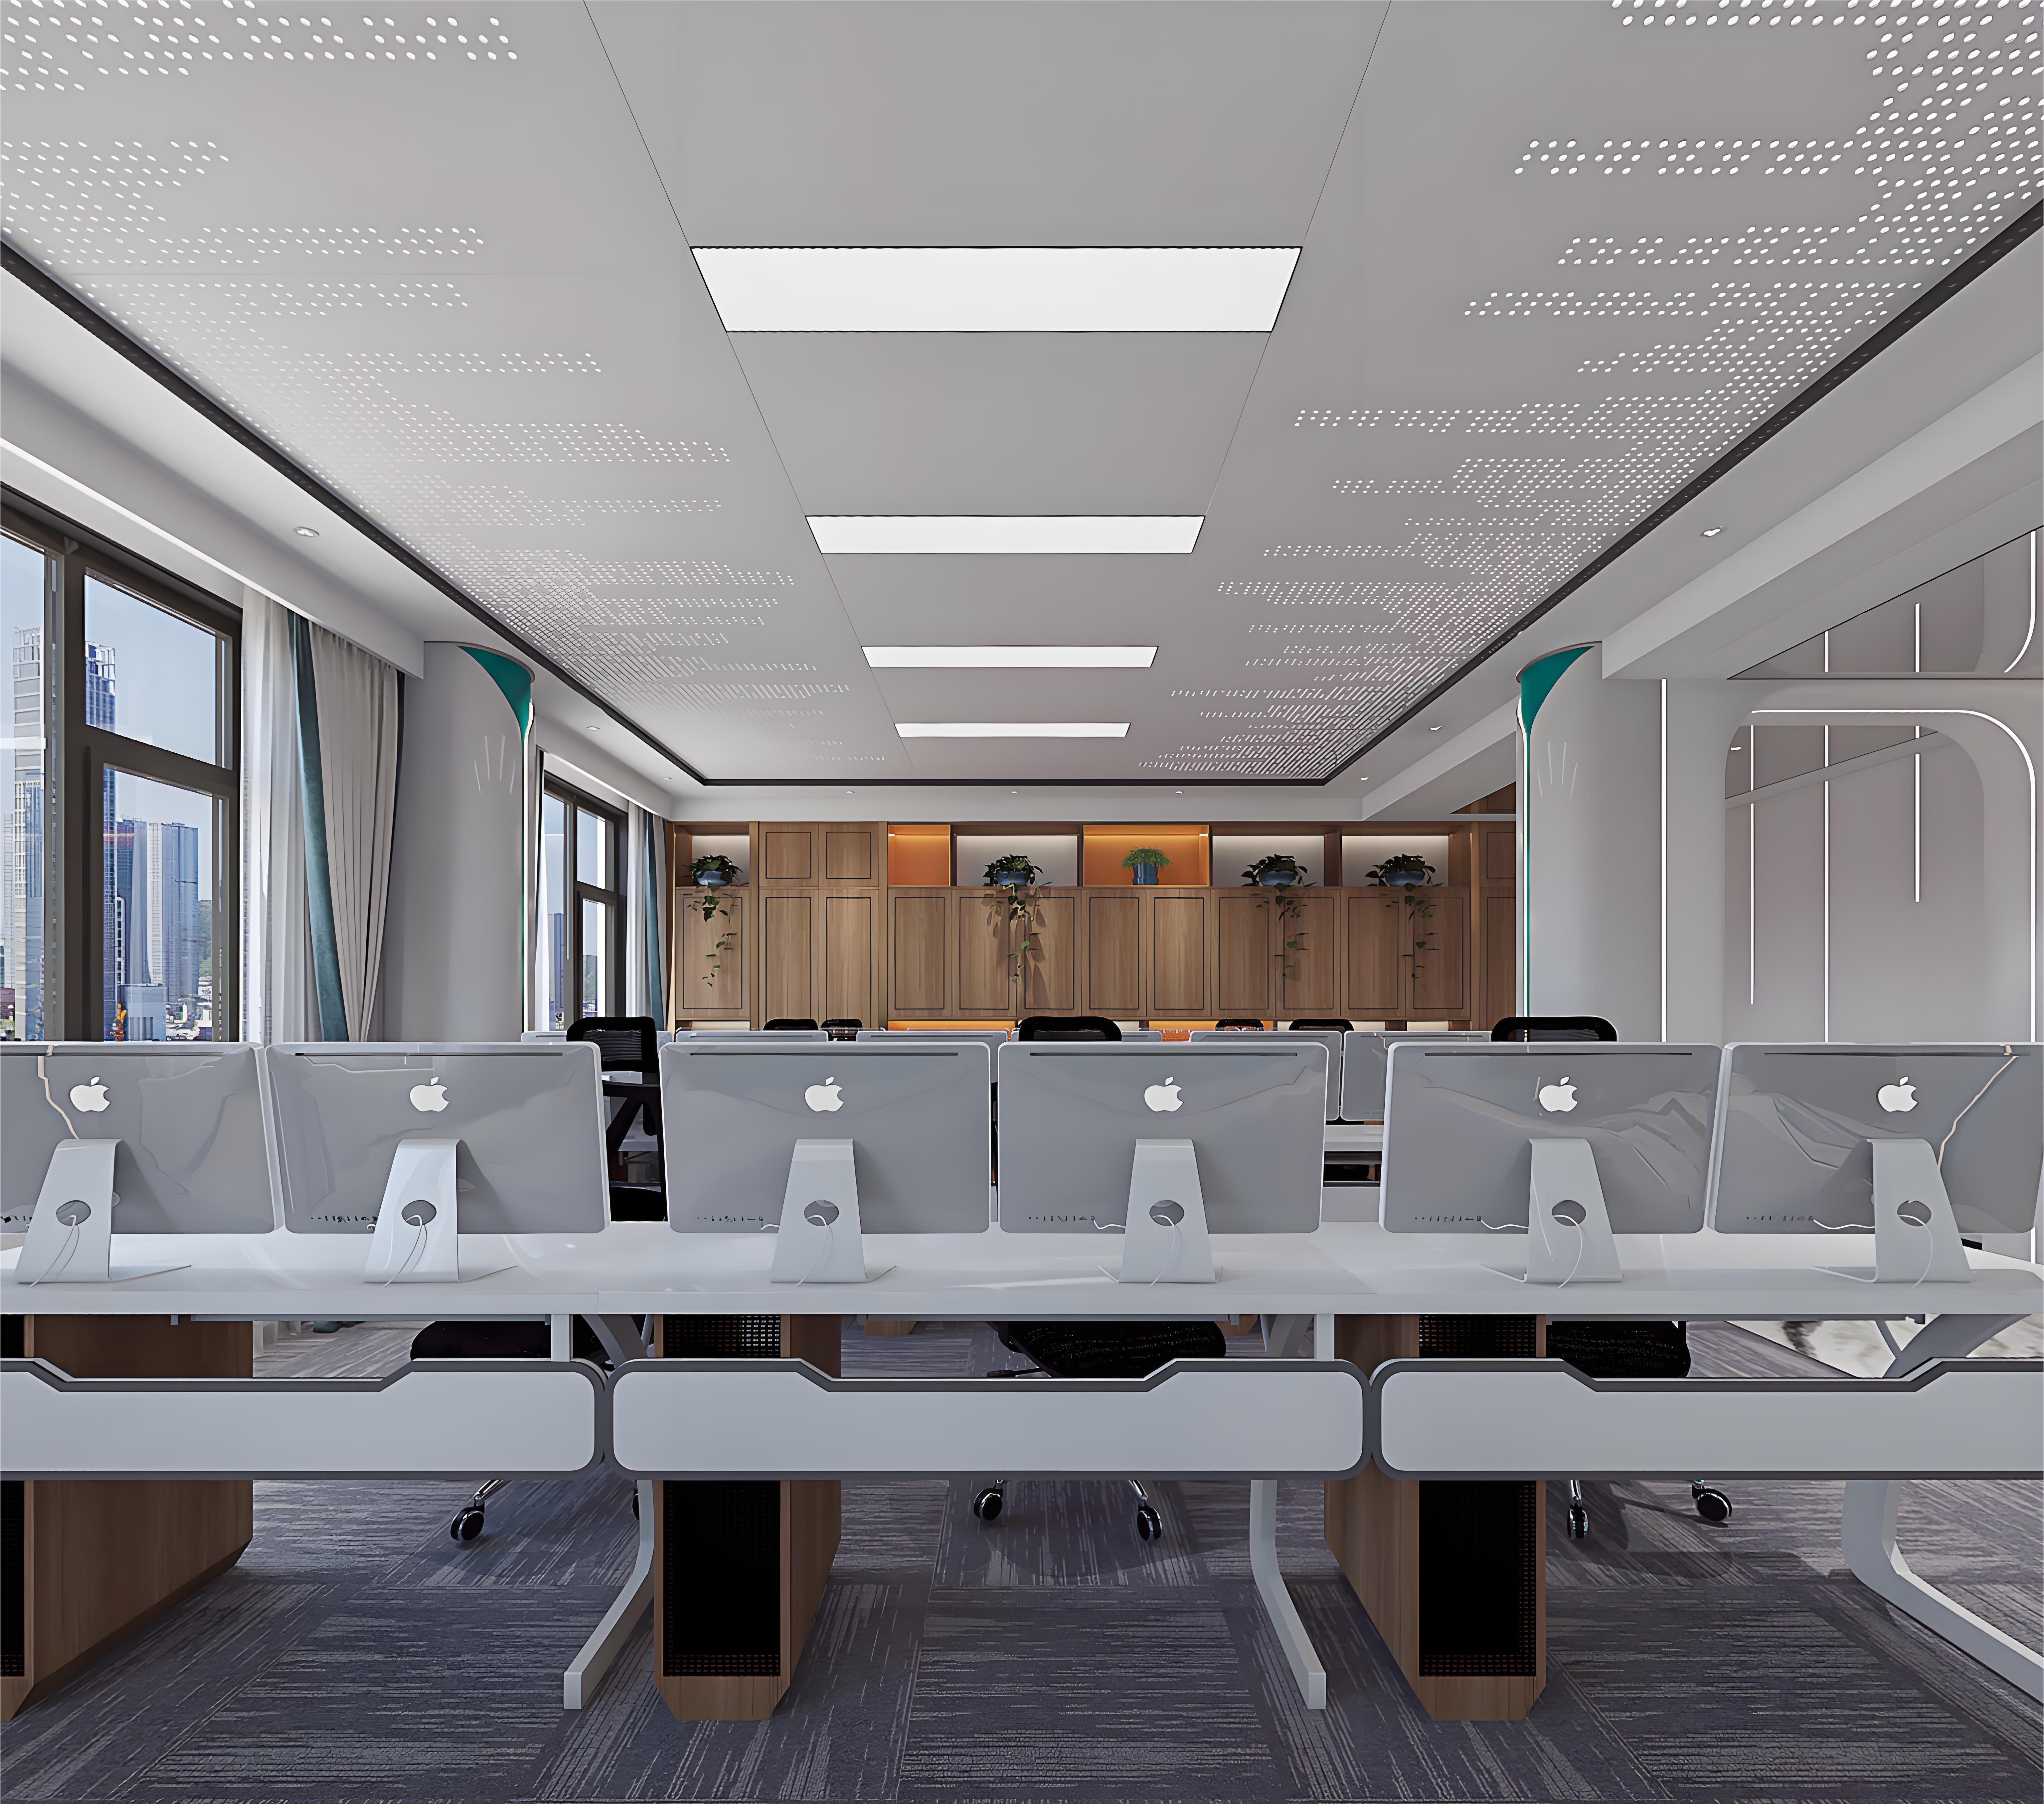 Benefits of Using Aluminum Ceiling Tiles in the Office